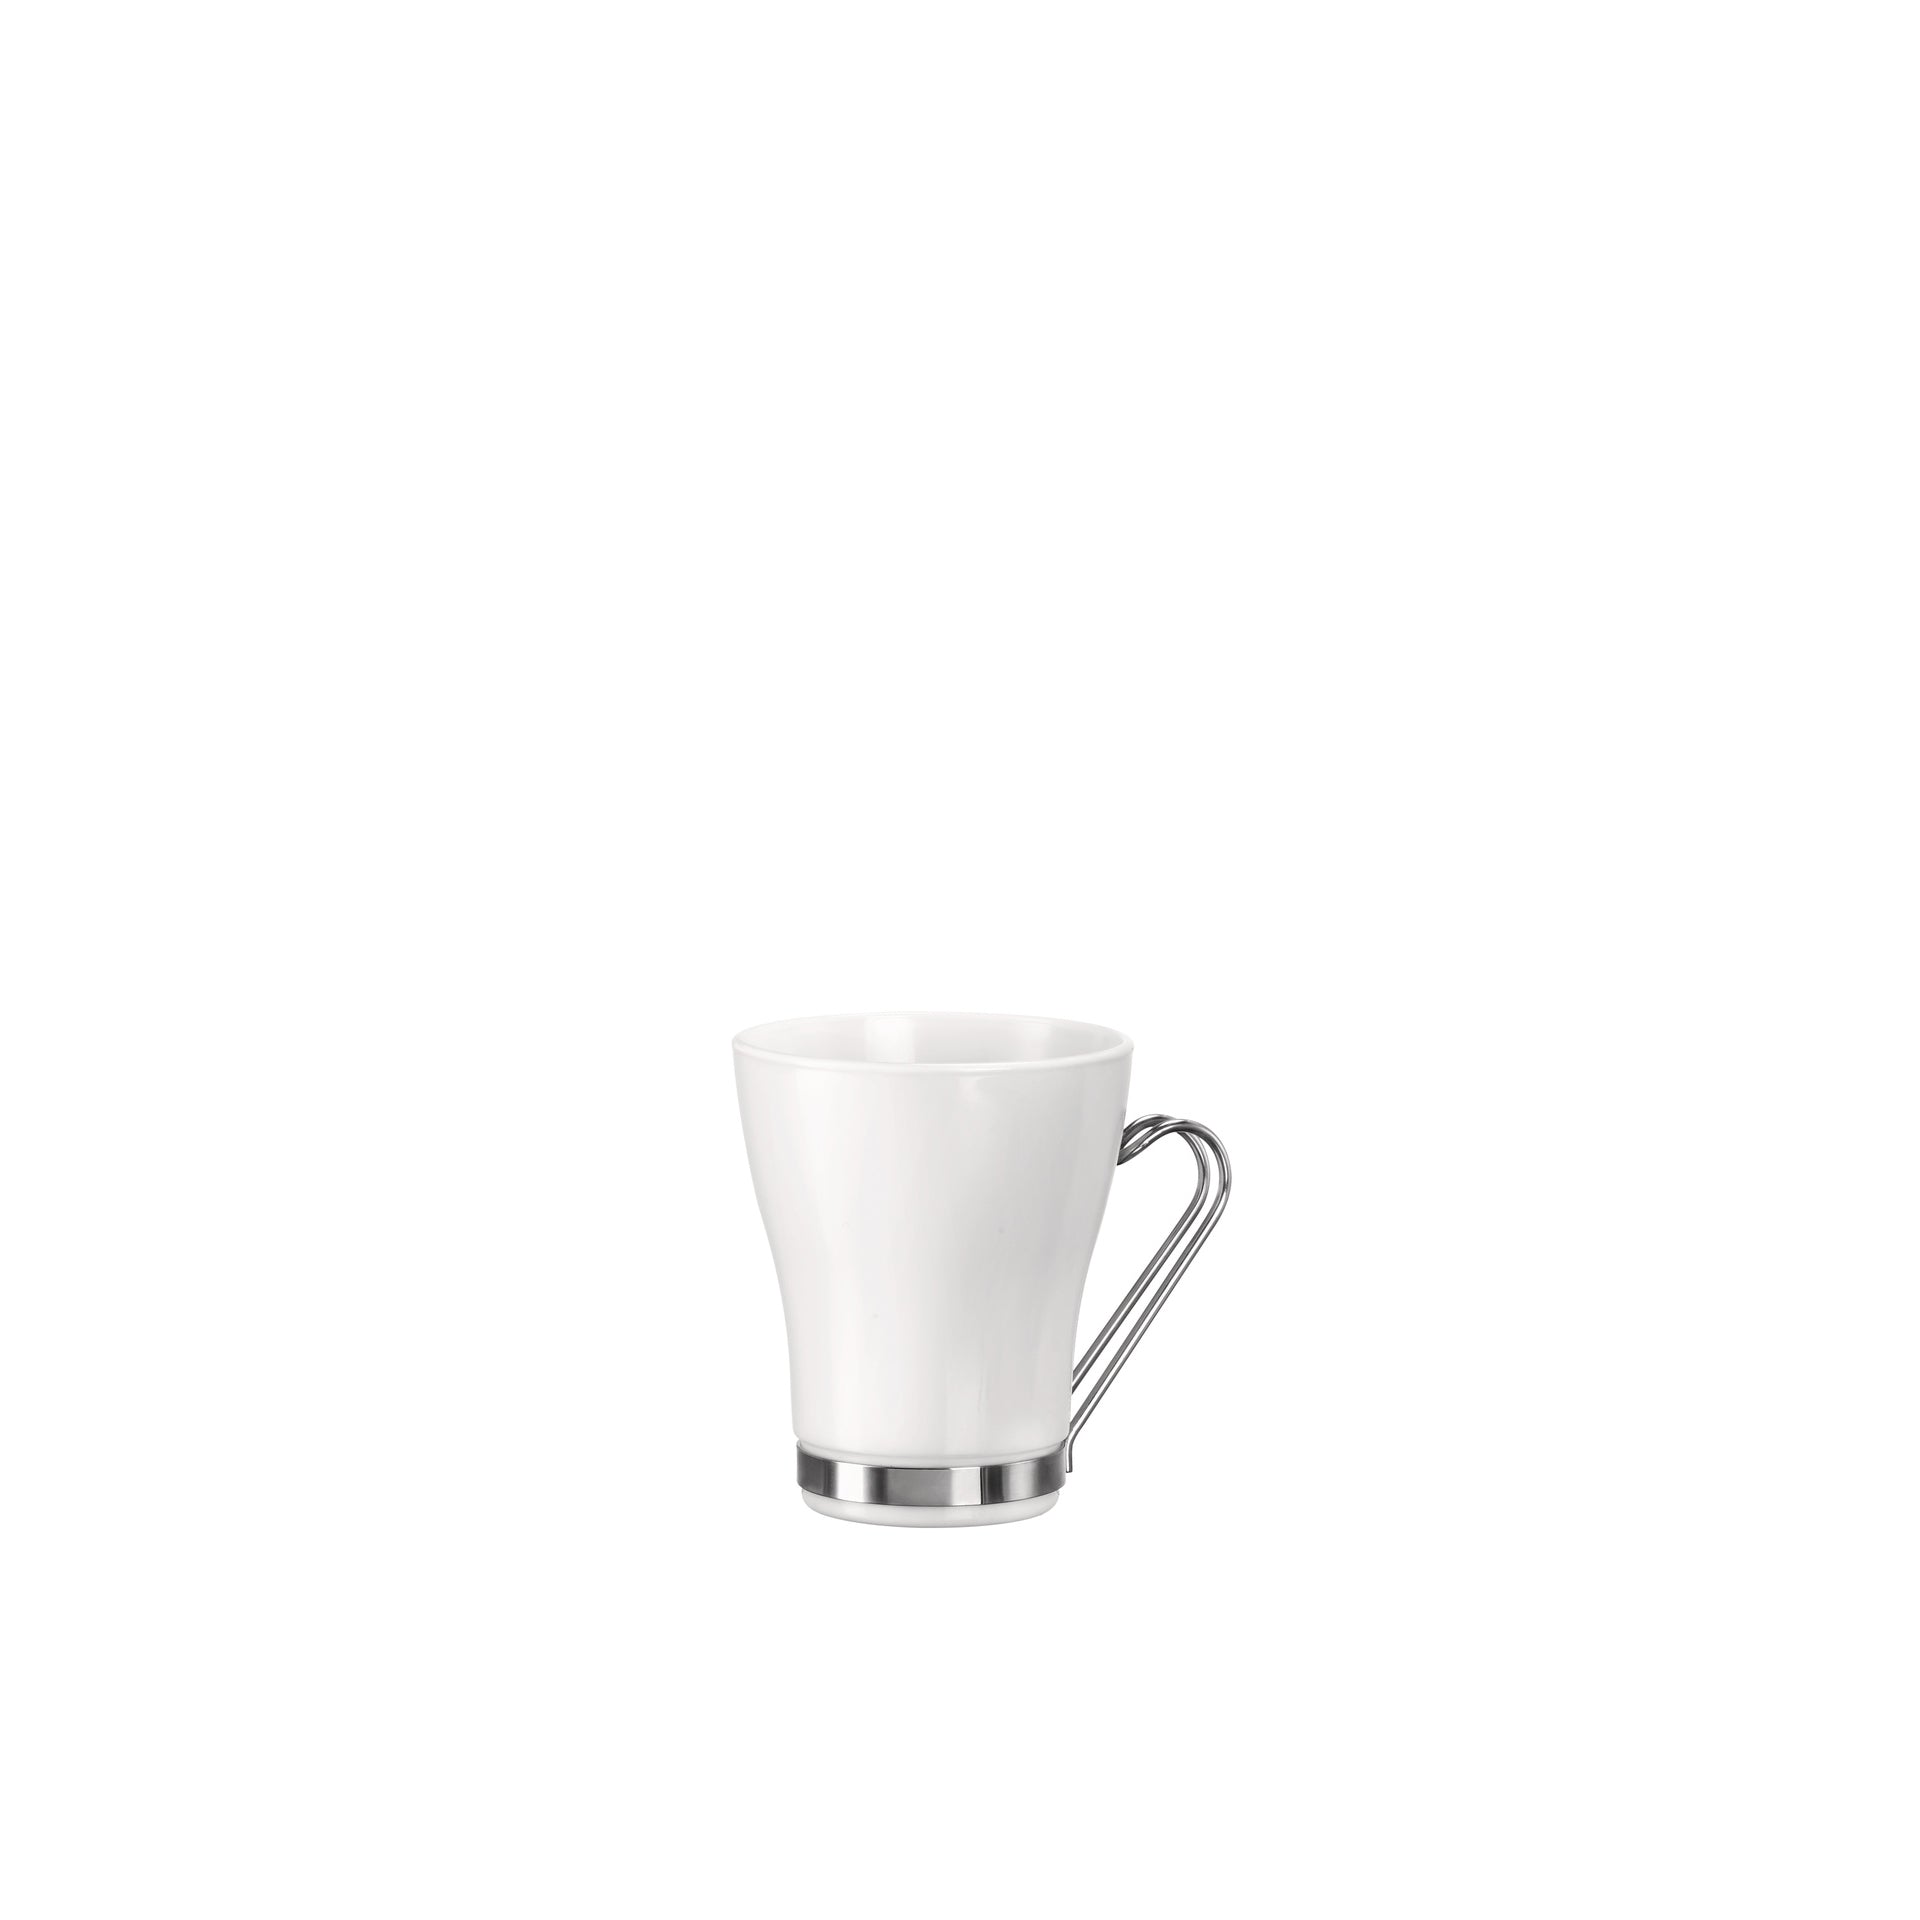 Aromateca 7.5 oz. Opal Glass Cappuccino Cup with Stainless Steel Handle (Set of 4)